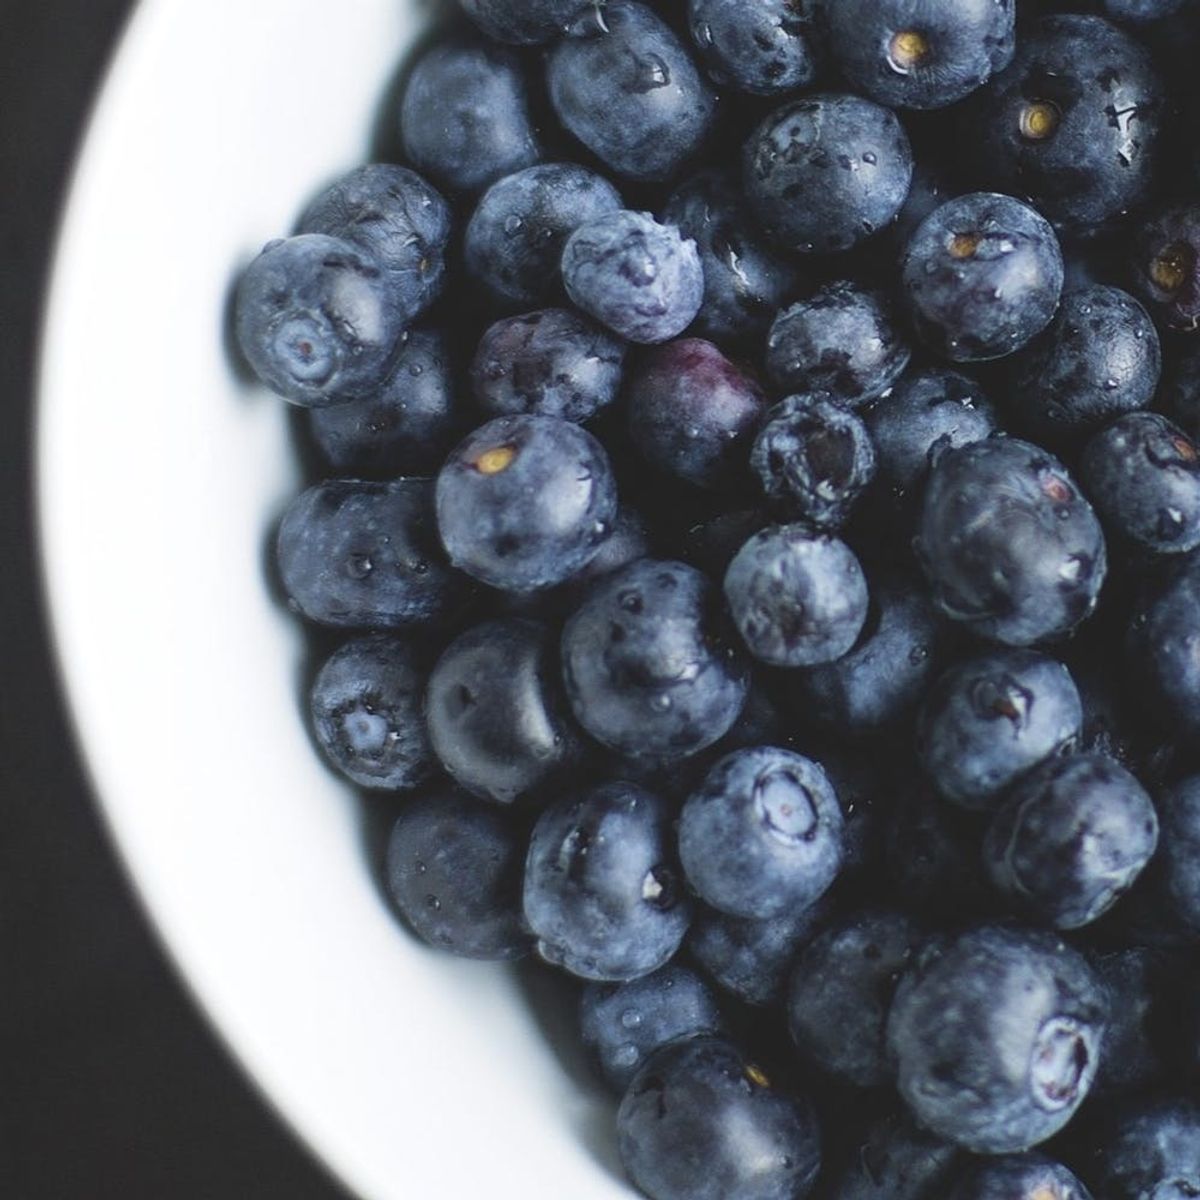 10 Everyday Superfoods That Won’t Break the Bank